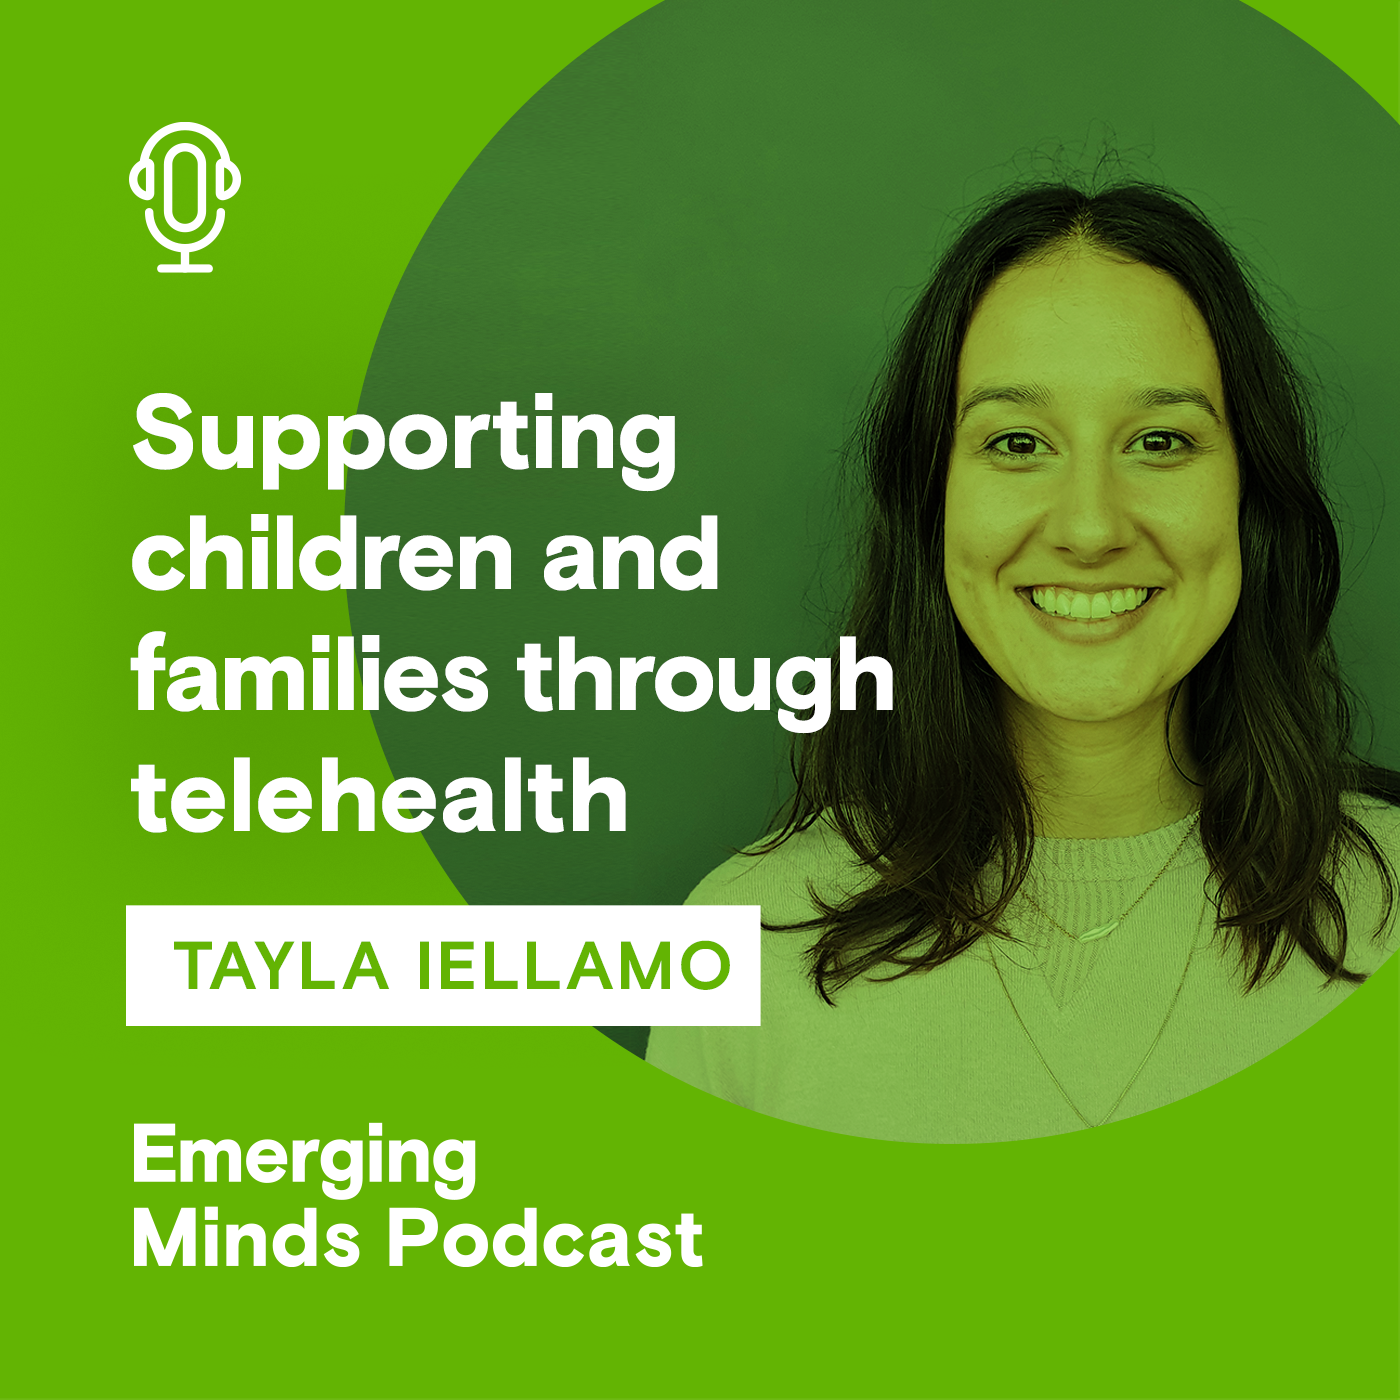 Re-release: Supporting children and families through telehealth